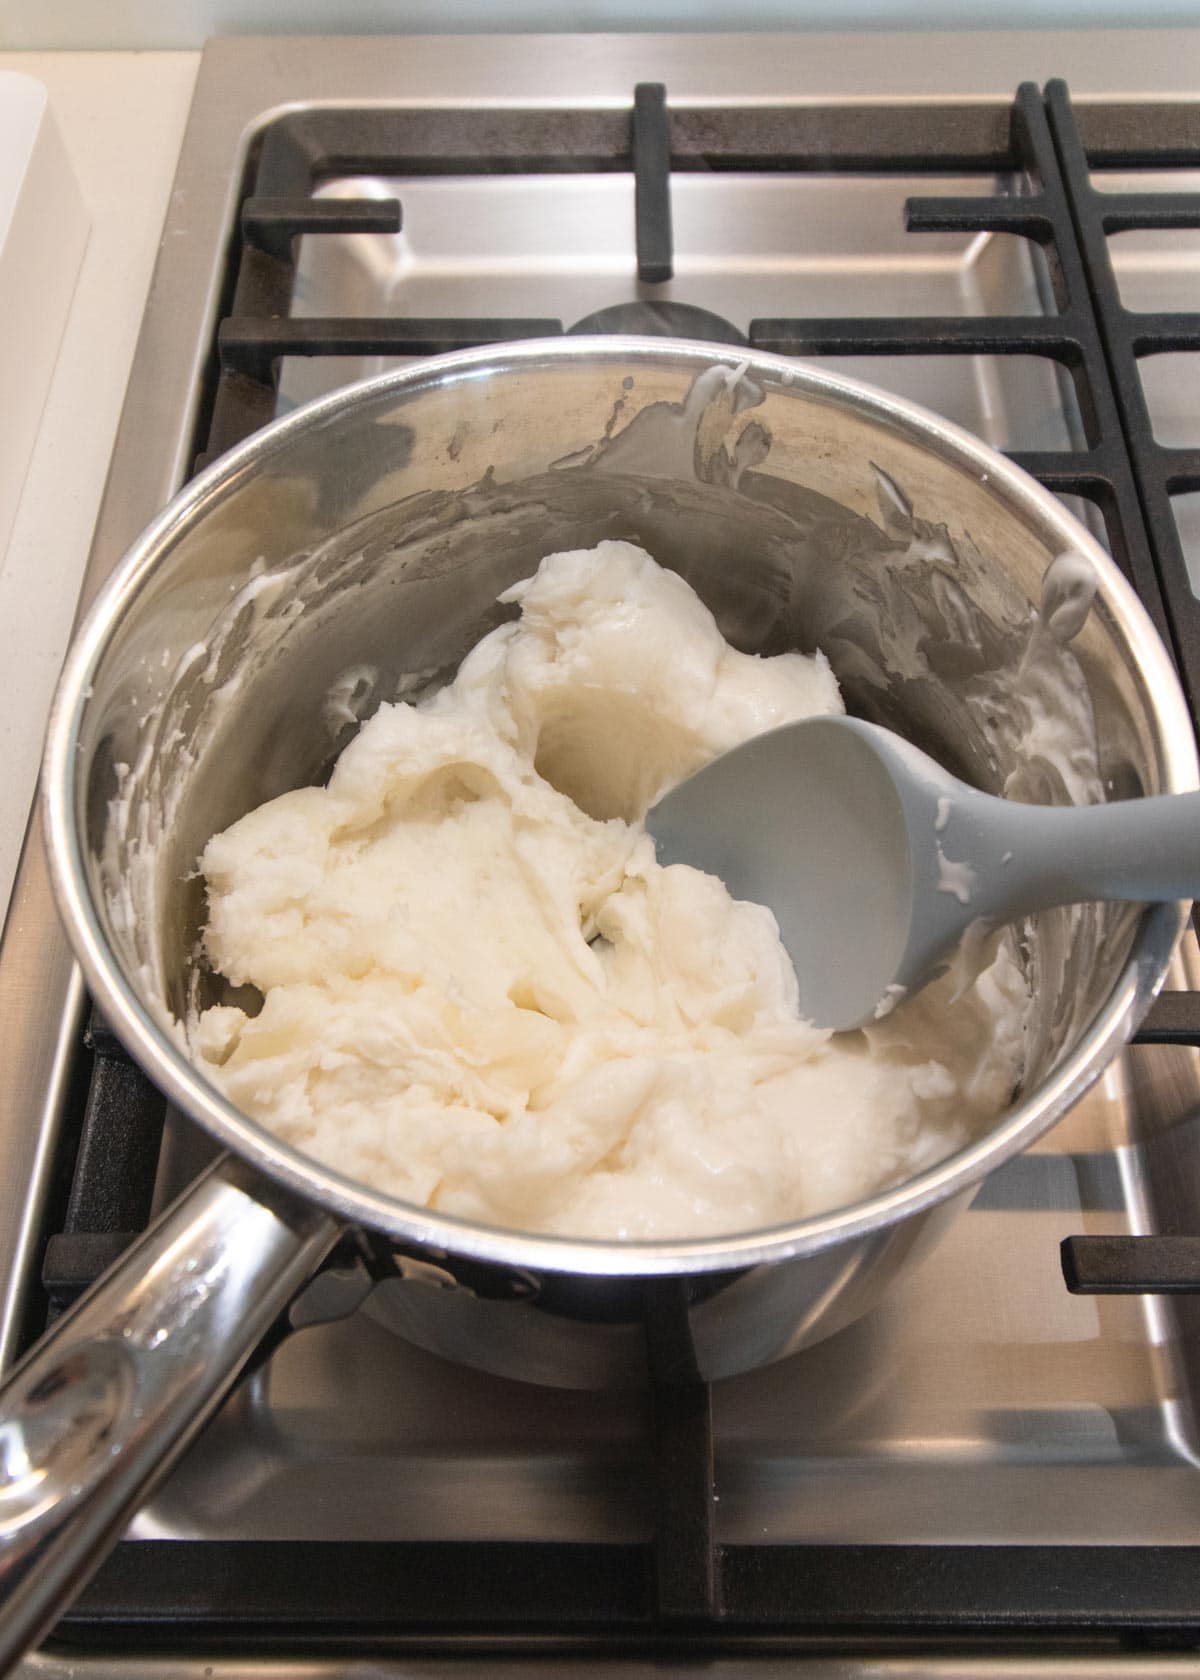 The playdough being cooked on the stove, until very thick.